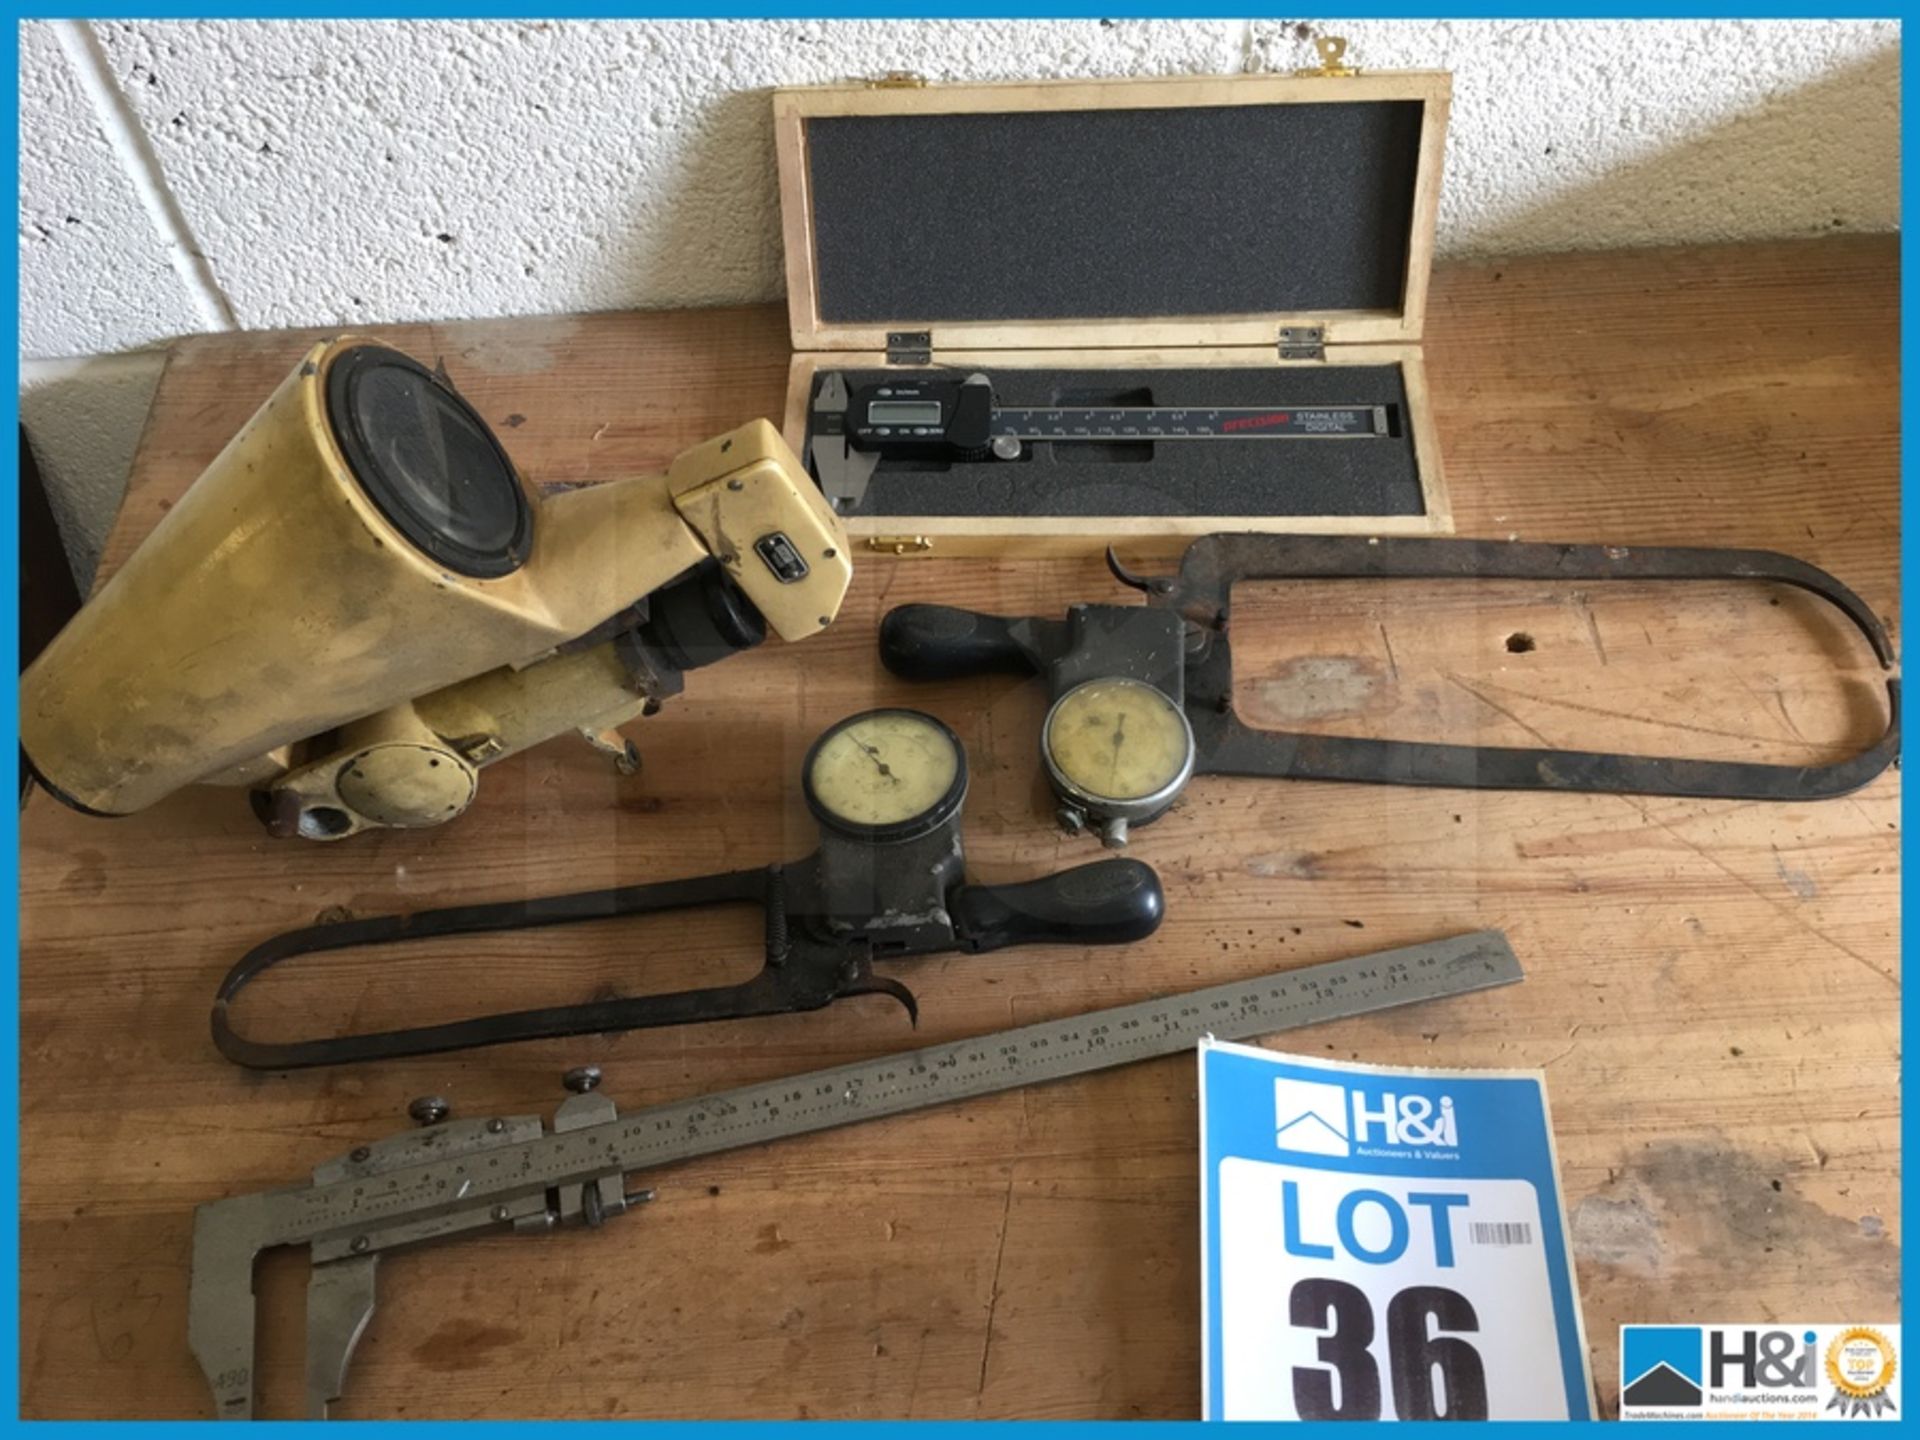 Selection of vintage measuring devices calipers etc. this lot can be shipped for £16.00 plus vat